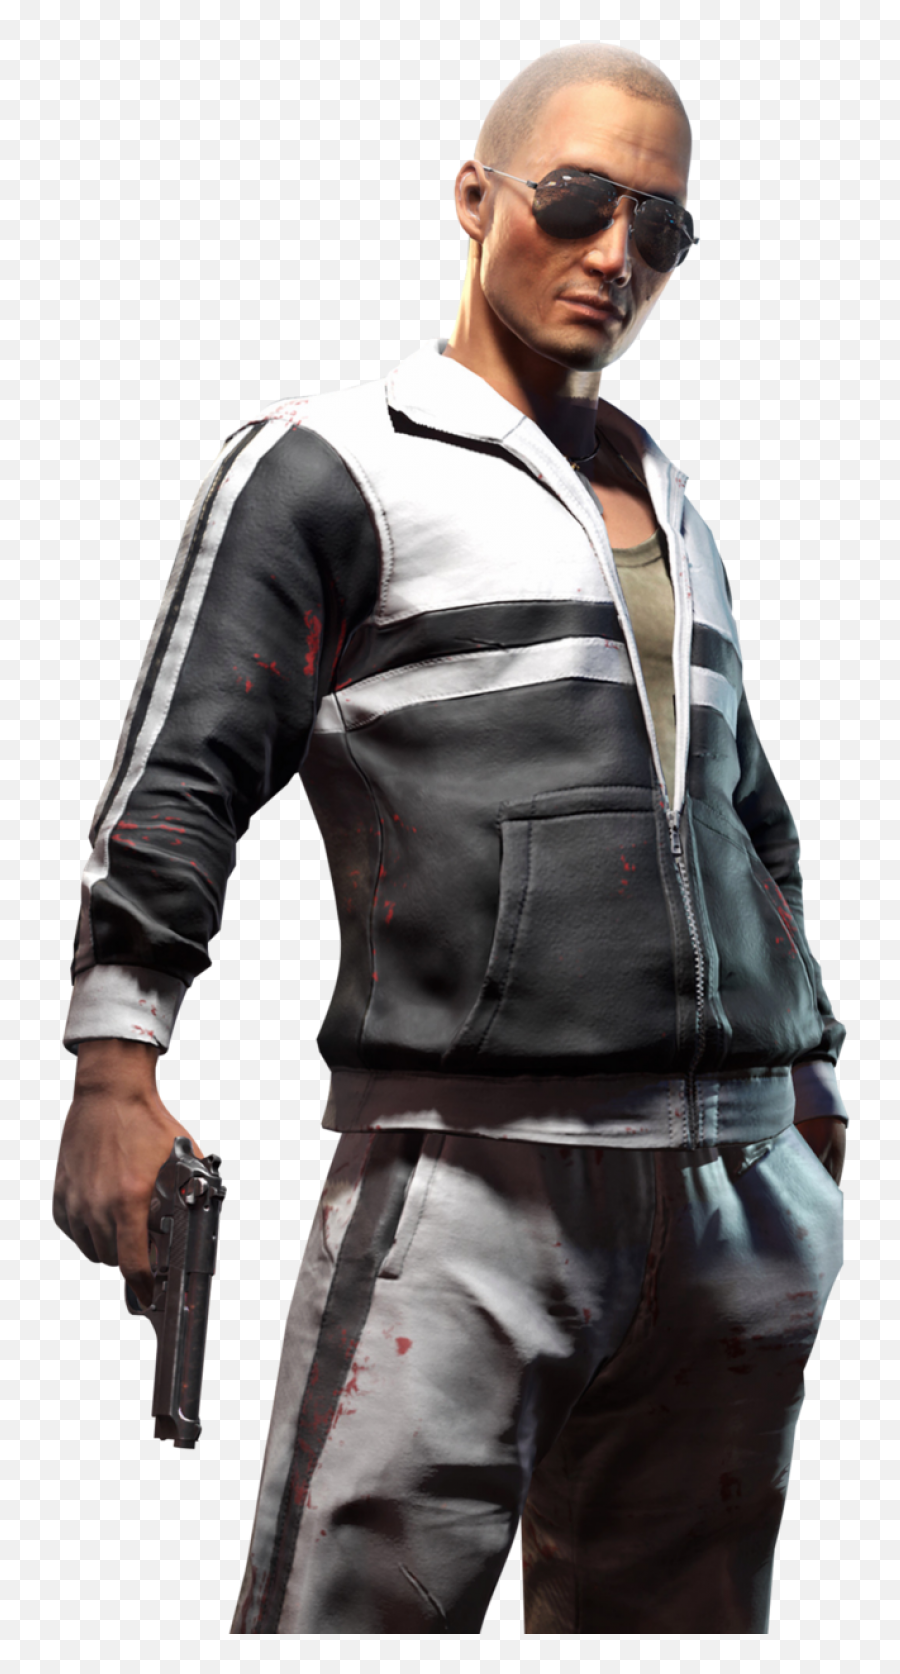 Png Image - Pubg Png,Player Unknown Battlegrounds Logo Png